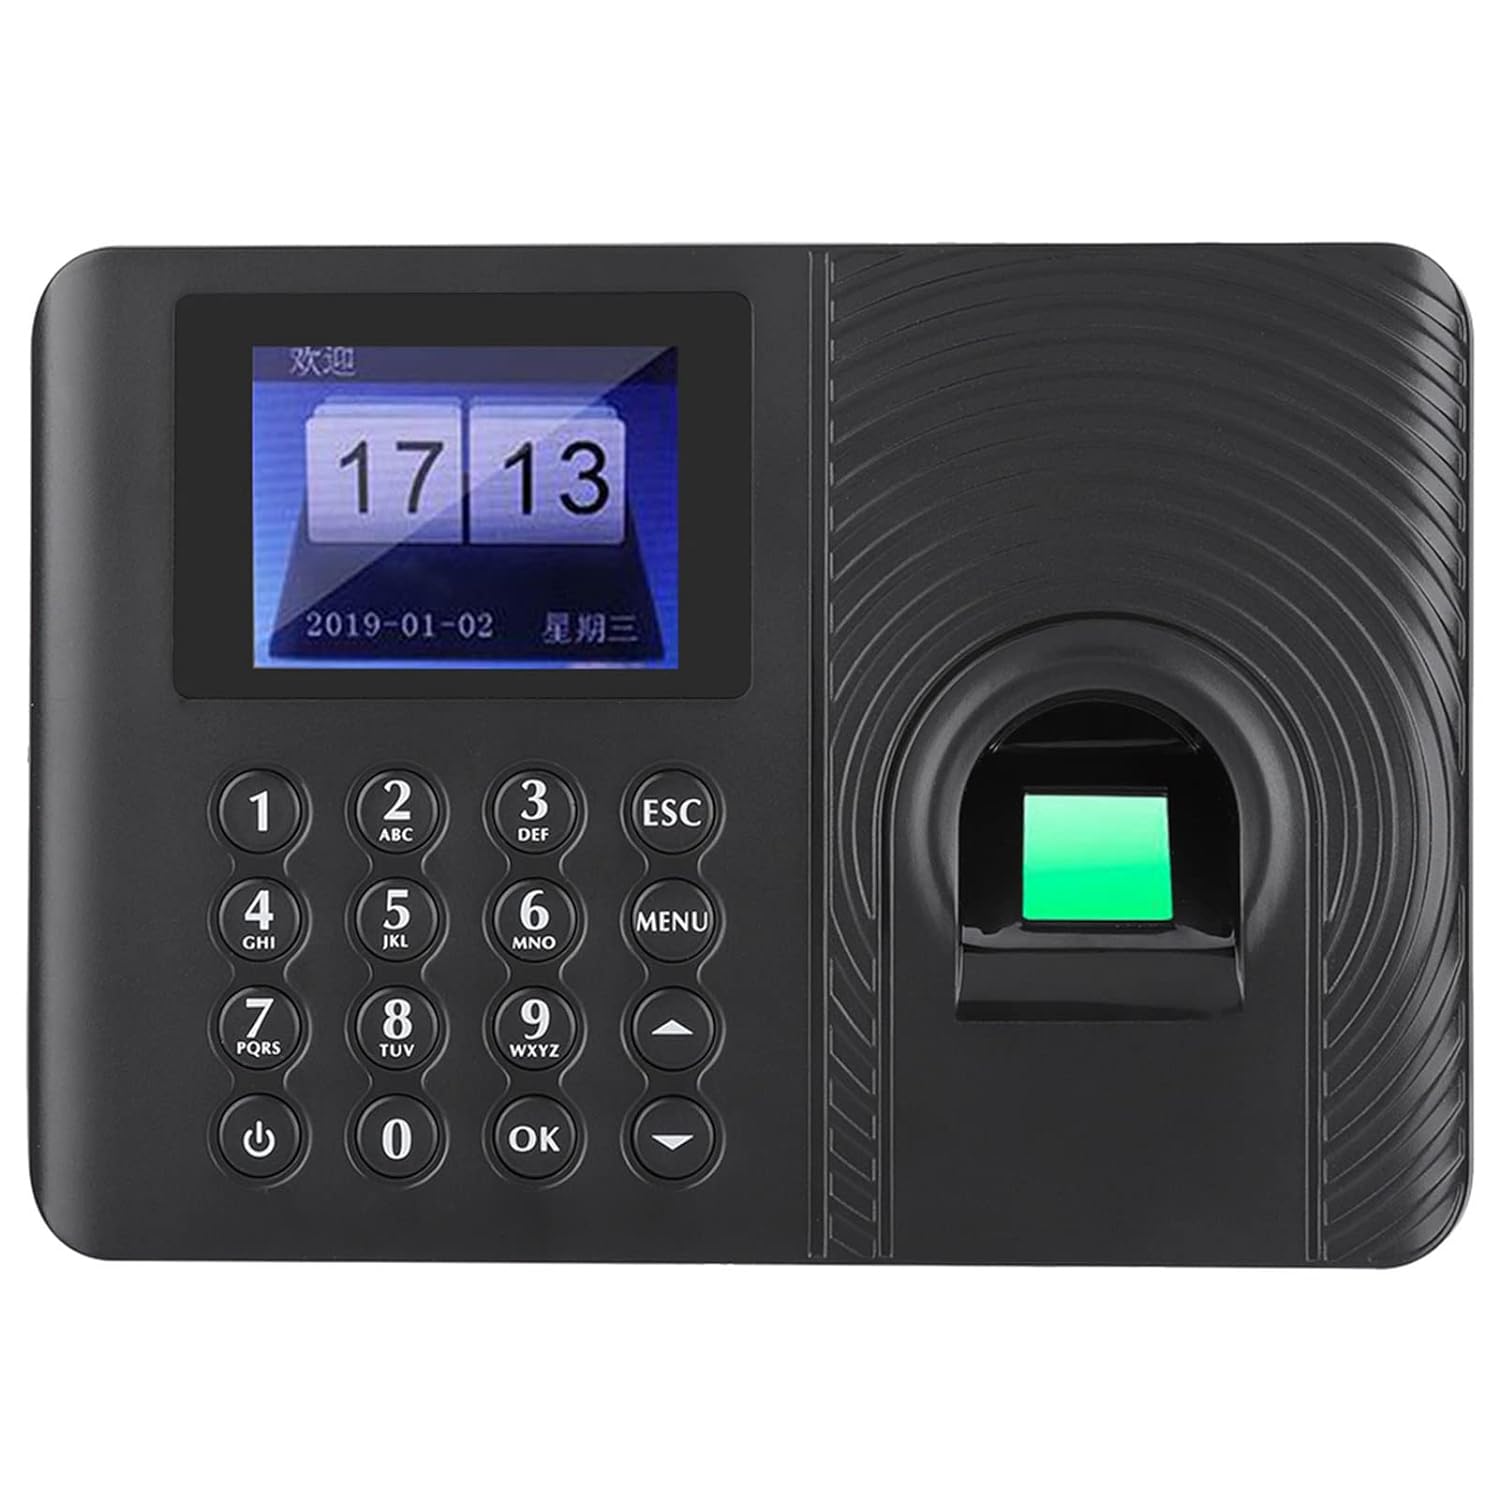 Biometric Fingerprint Password Time Attendance Machine, Employee Checking in Recorder Recognition Device Access Control 2 4In High Definition Color LCD Screen Attendance Controller (1)